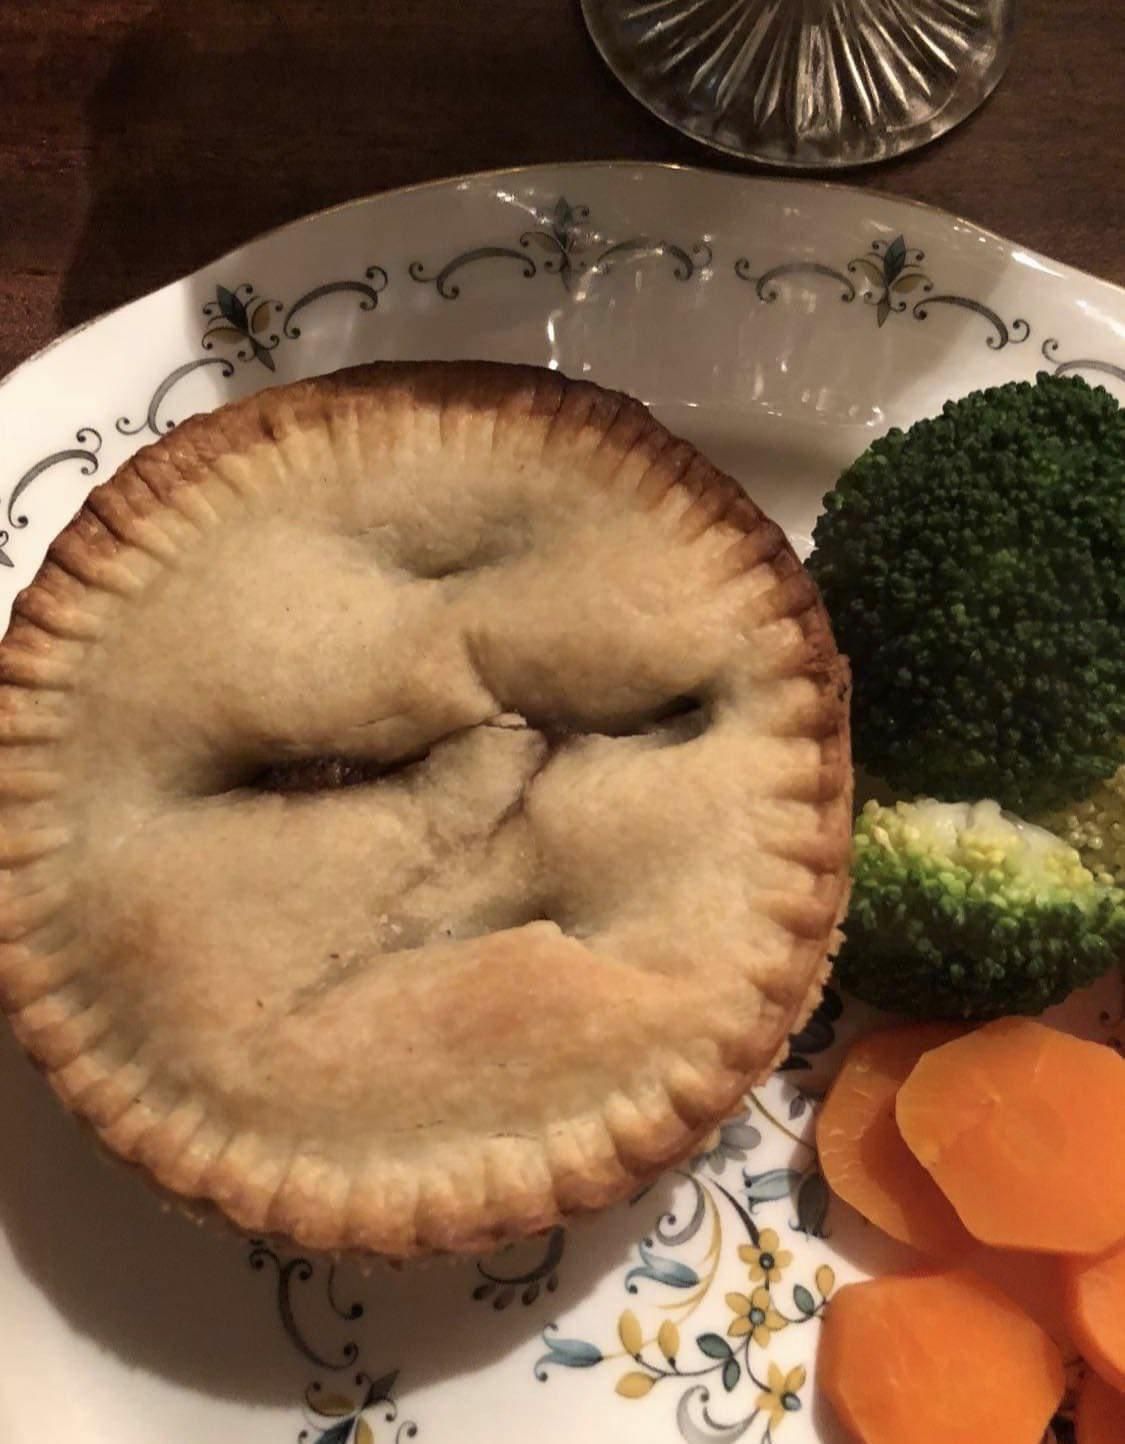 Why does my pie hate broccoli so much??